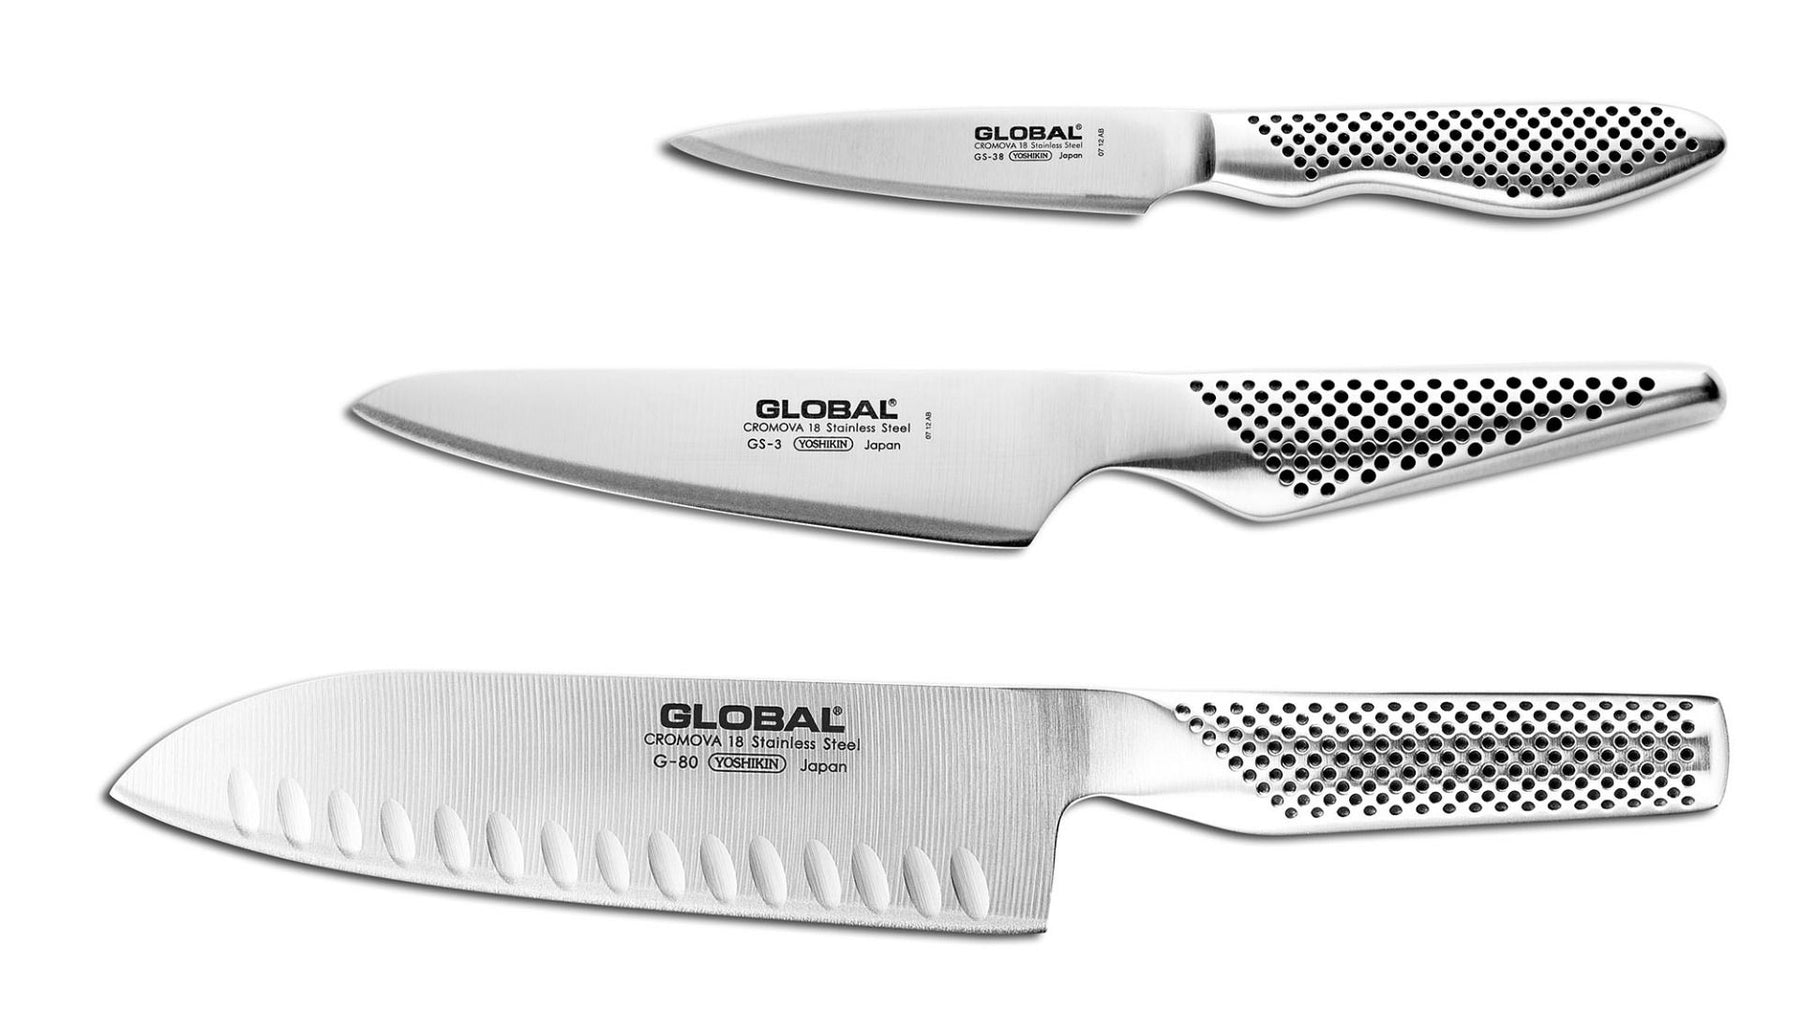 Global G-48338-3 Piece Knife Set with Santoku - Hollow Ground, Utility and Paring Knife